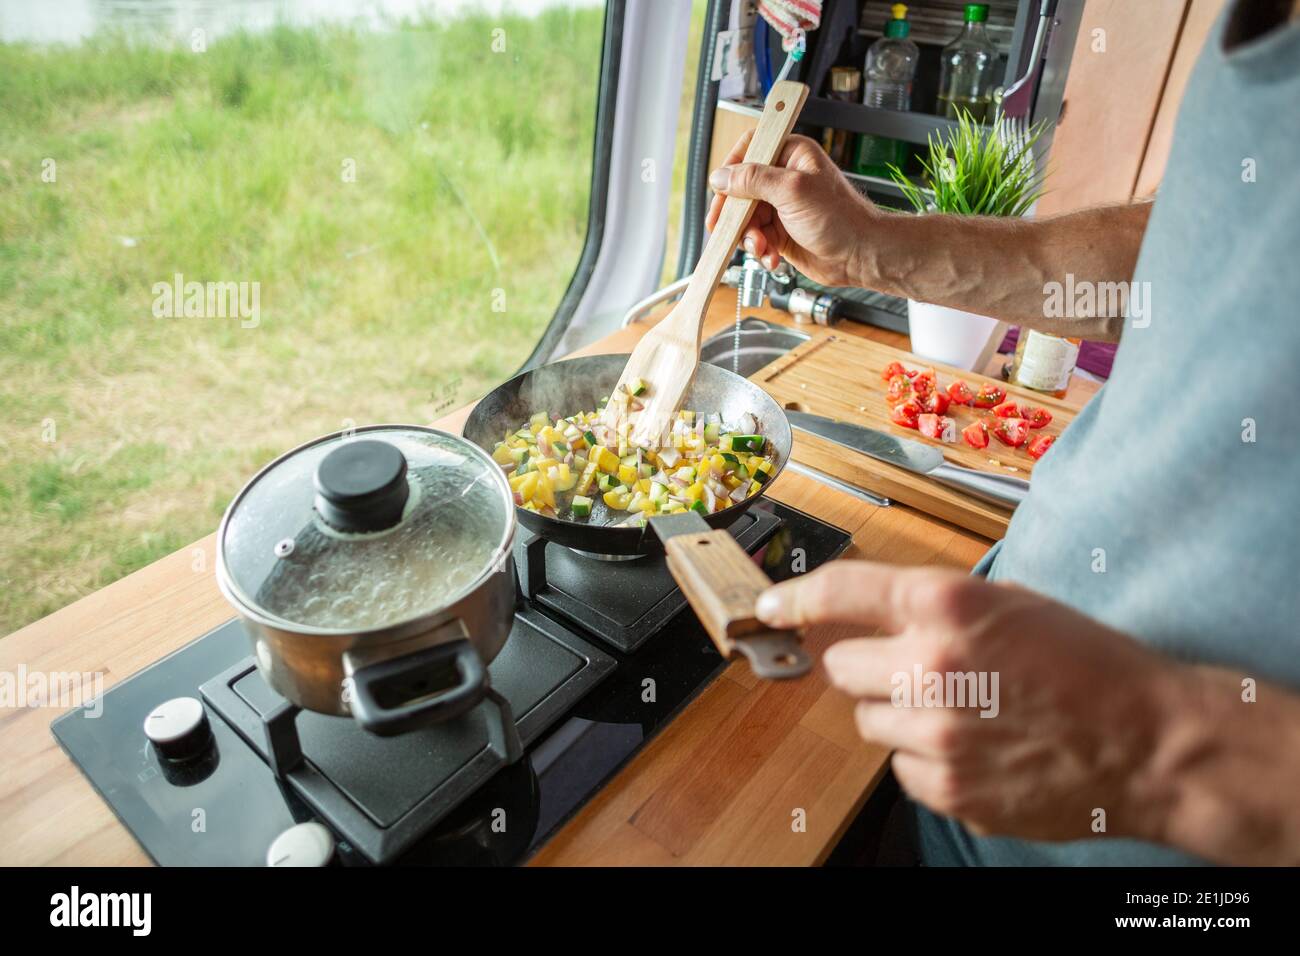 Cooking food on a stove inside a caravan Stock Photo